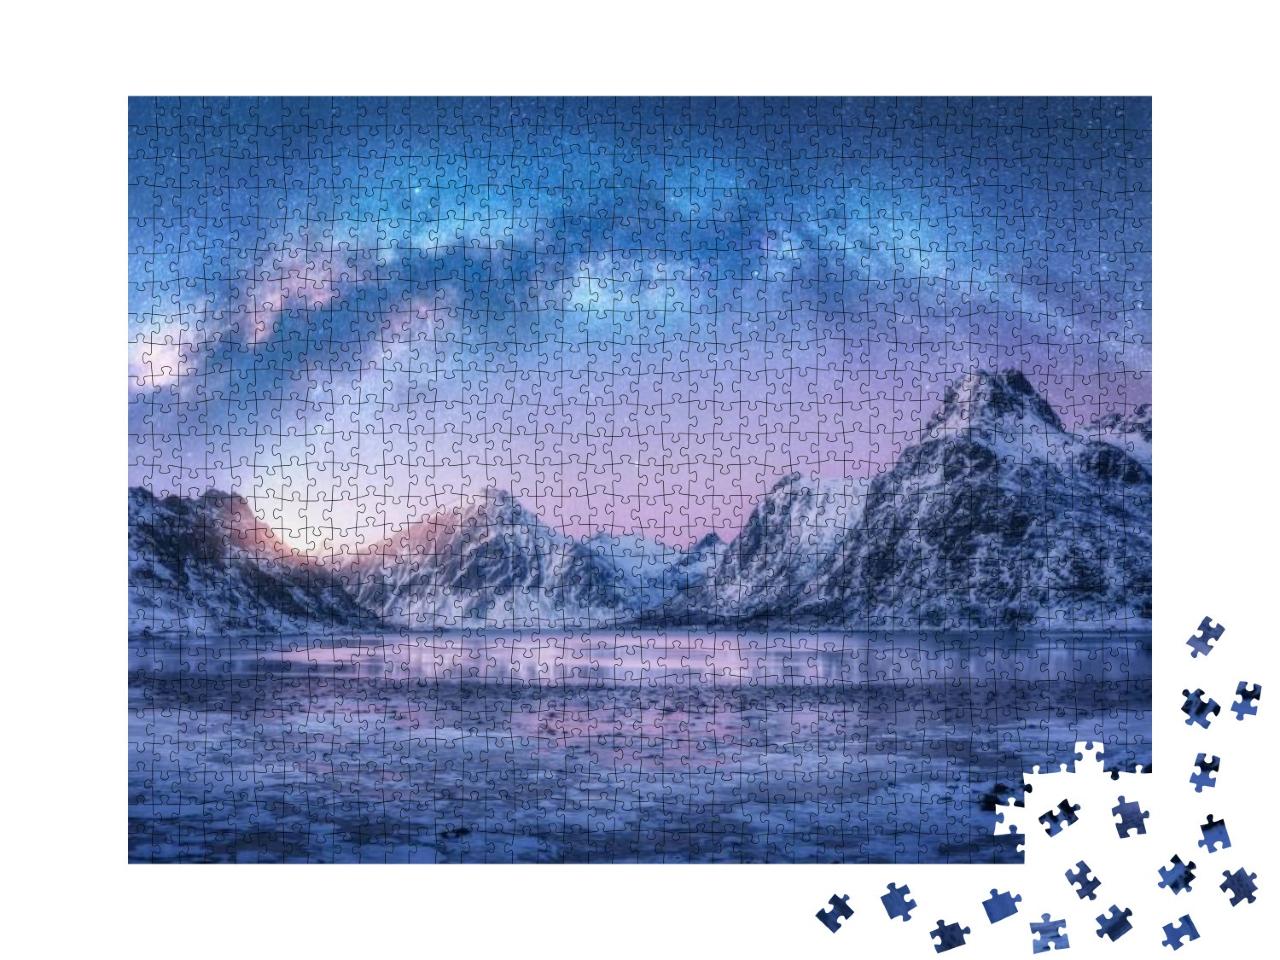 Milky Way Above Frozen Sea Coast & Snow Covered Mountains... Jigsaw Puzzle with 1000 pieces